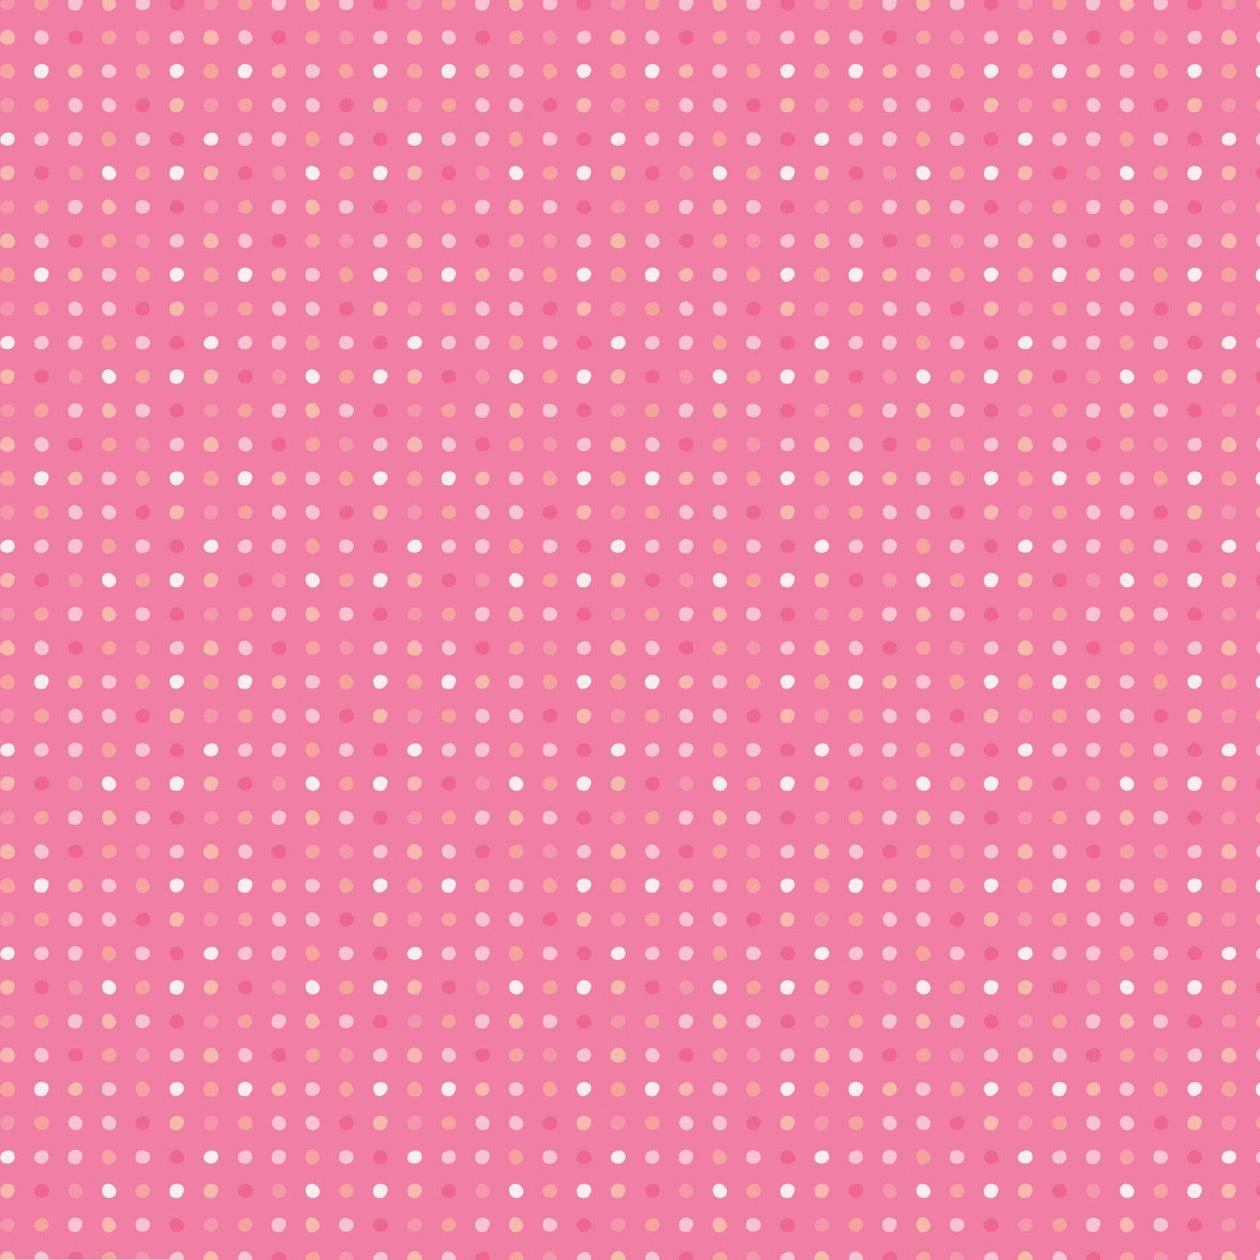 Seeing Spot, Strawberry Soda Dk. Pink, SS24194, sold by the 1/2 yard